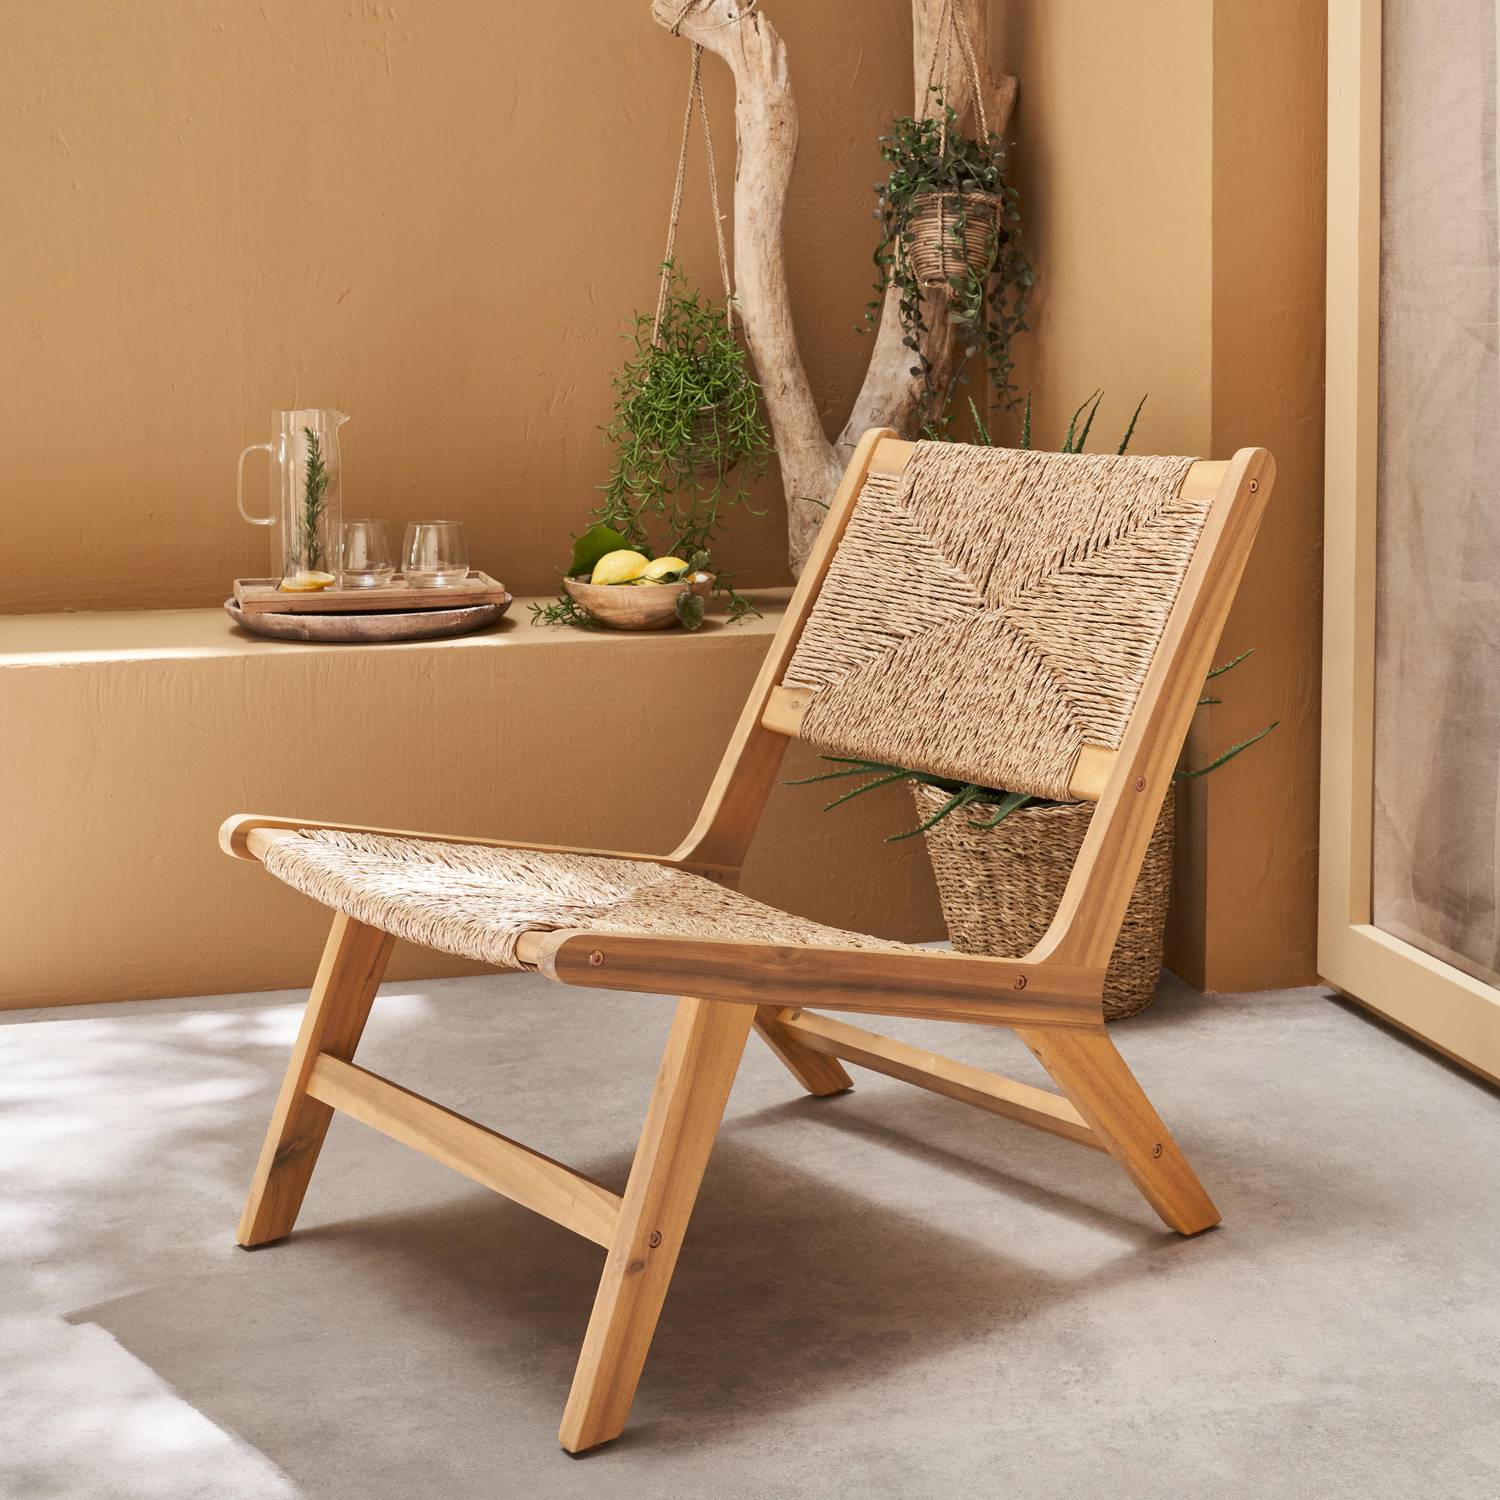 Relaxing garden chair, wood and straw-like resin, Indoor/Outdoor, natural Photo1